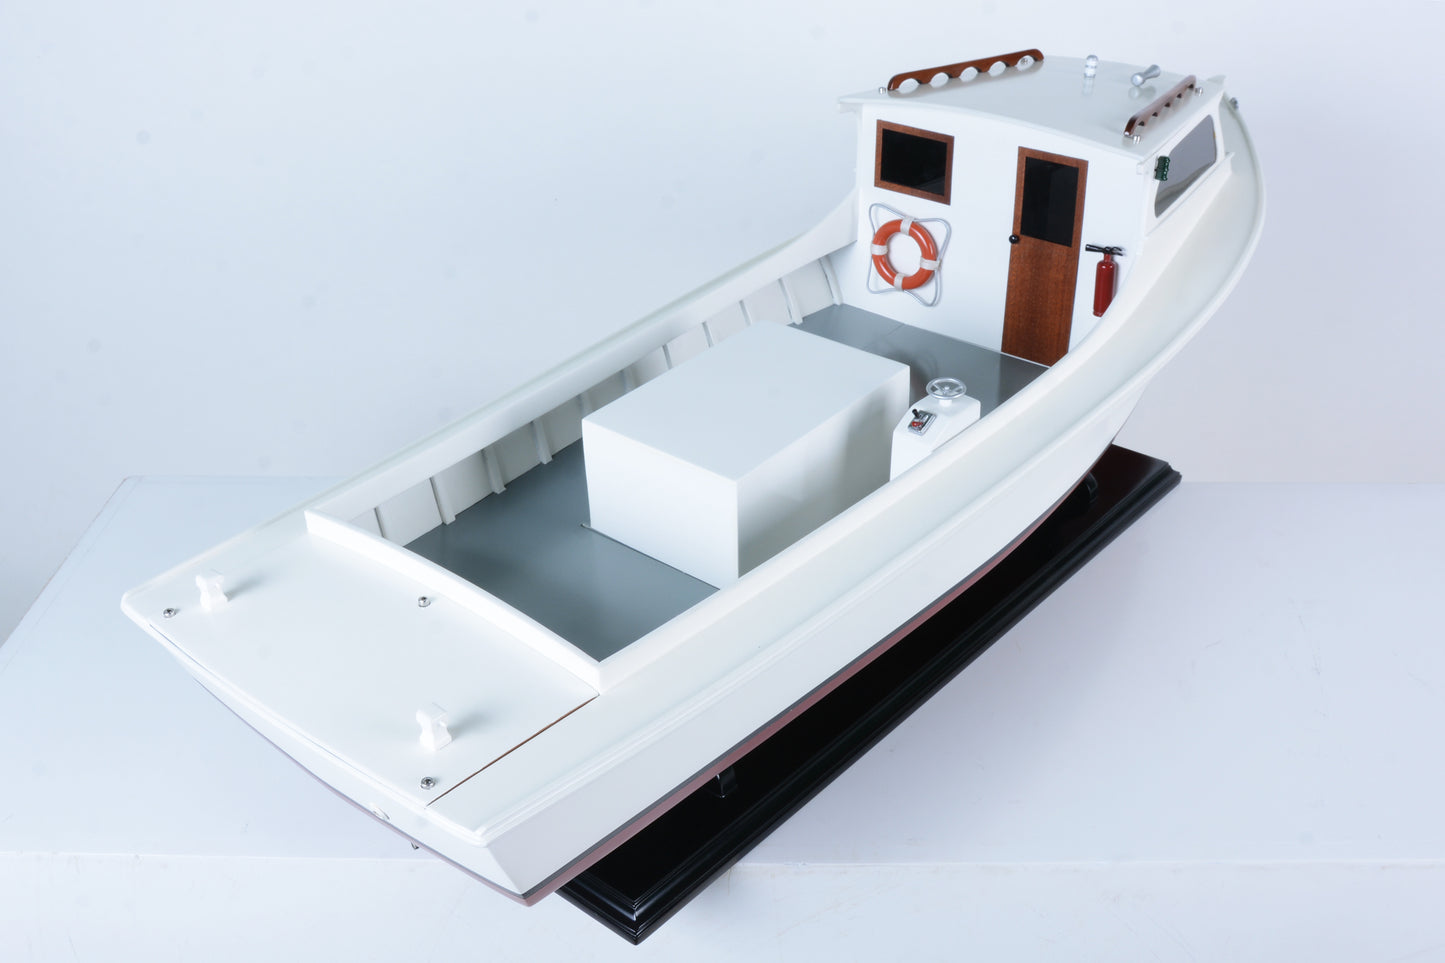 RC WORKBOAT| MUSEUM-QUALITY